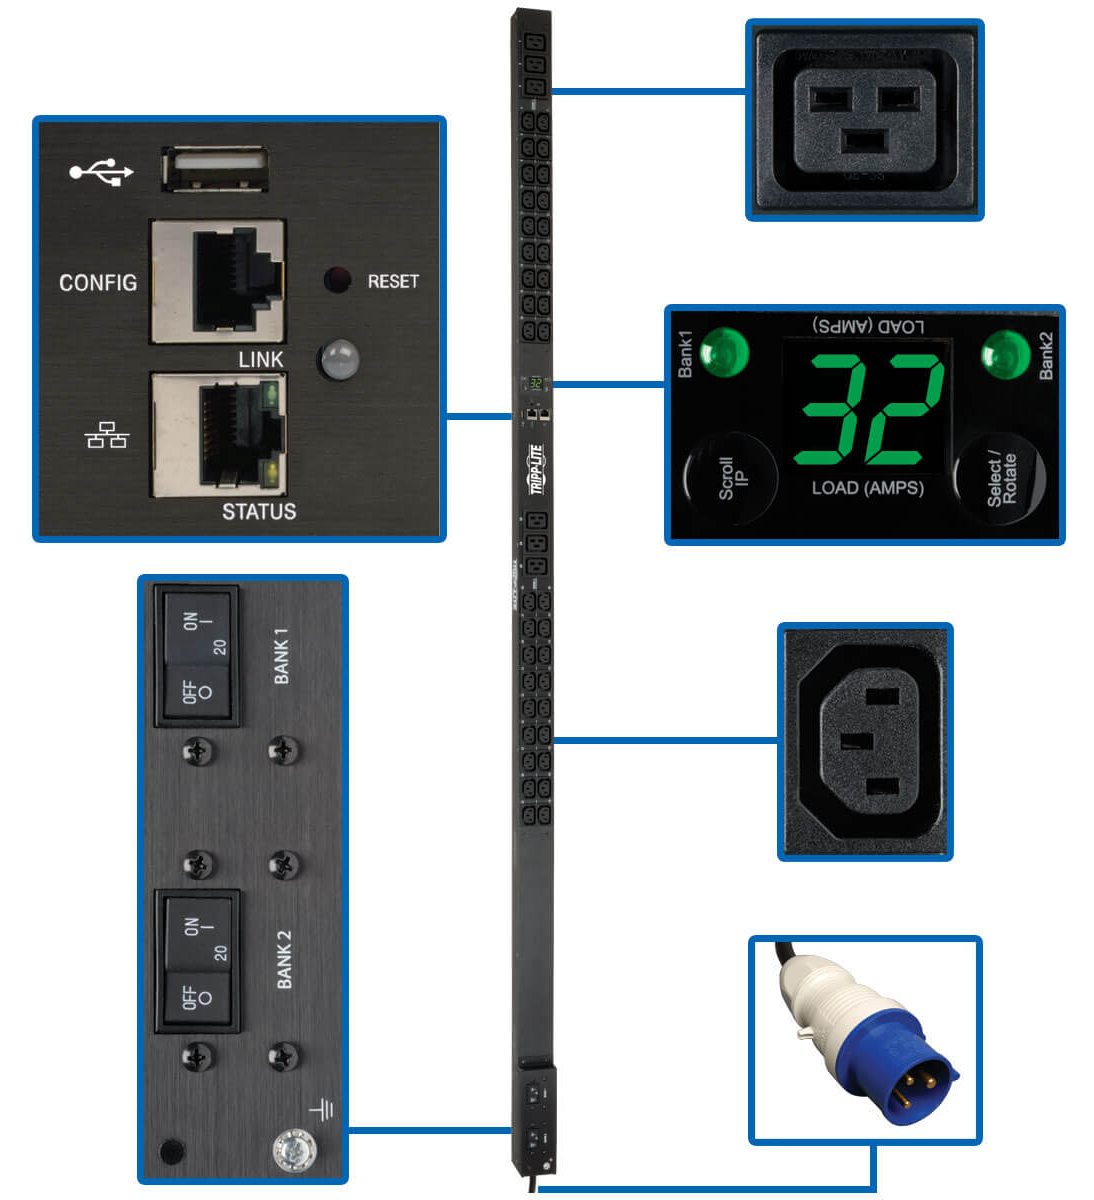 You Recently Viewed Tripp Lite PDU3XEVN6G20 11.5kW 3-Phase Monitored PDU Image